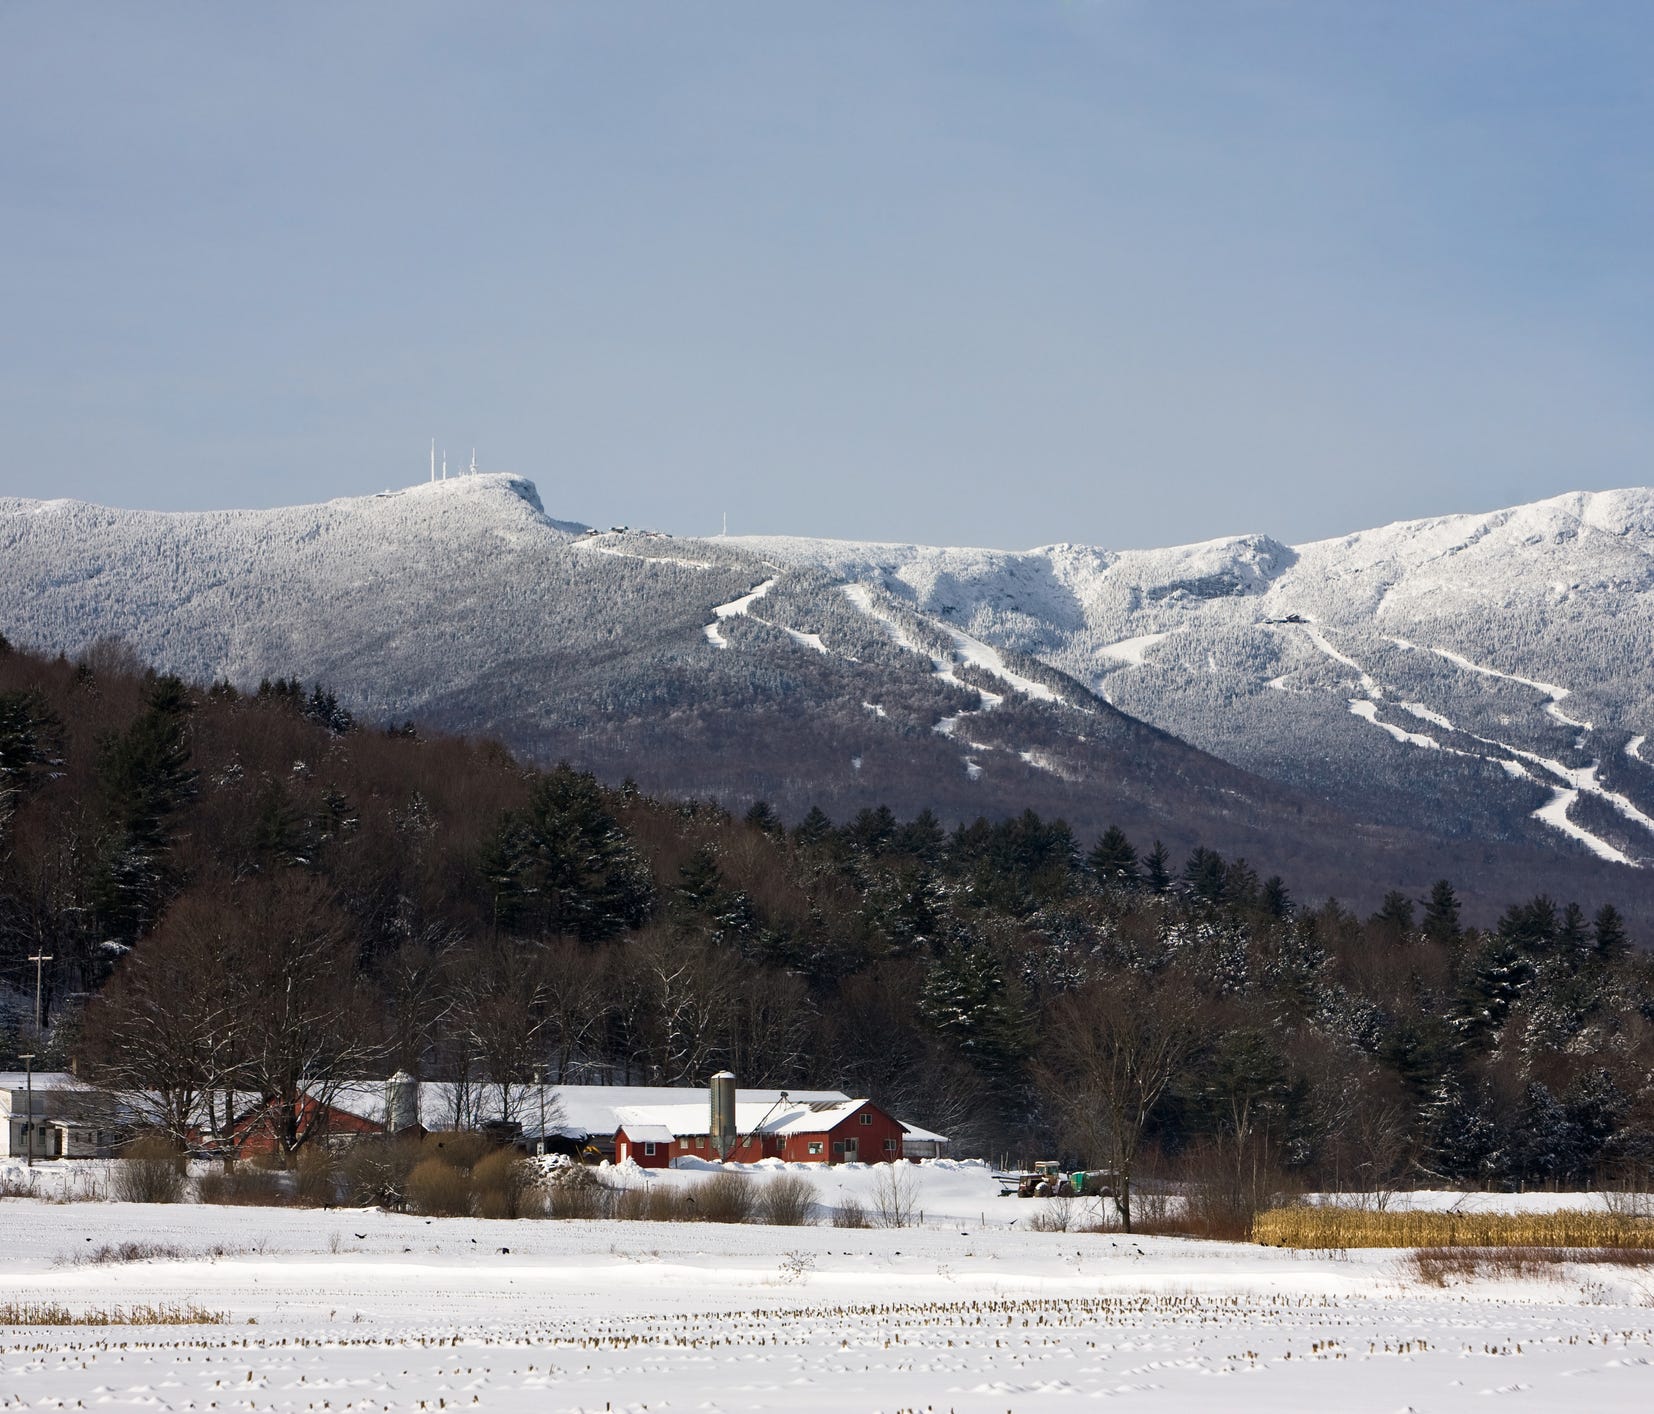 In a rather anomalous turn, Stowe Mountain Resort in Vermont has seen snow pile up at a rate equal to that of its sibling ski resorts in Colorado.